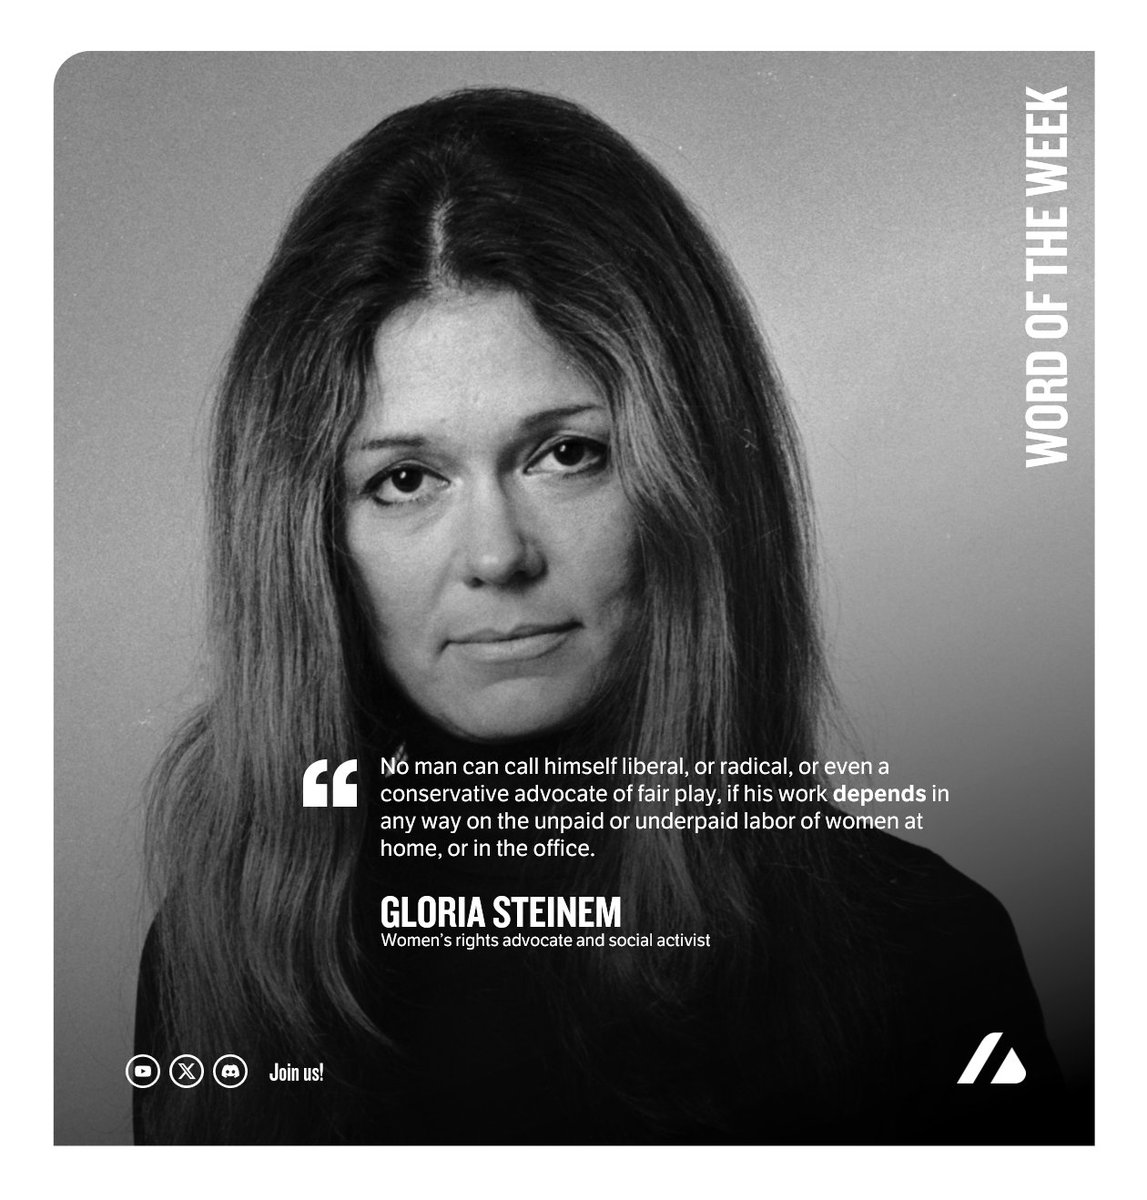 WORD OF THE WEEK - No man can call himself liberal, or radical, or even a conservative advocate of fair play, if his work depends in any way on the unpaid or underpaid labor of women at home, or in the office.

- Gloria Steinem

#WordOfTheWeek